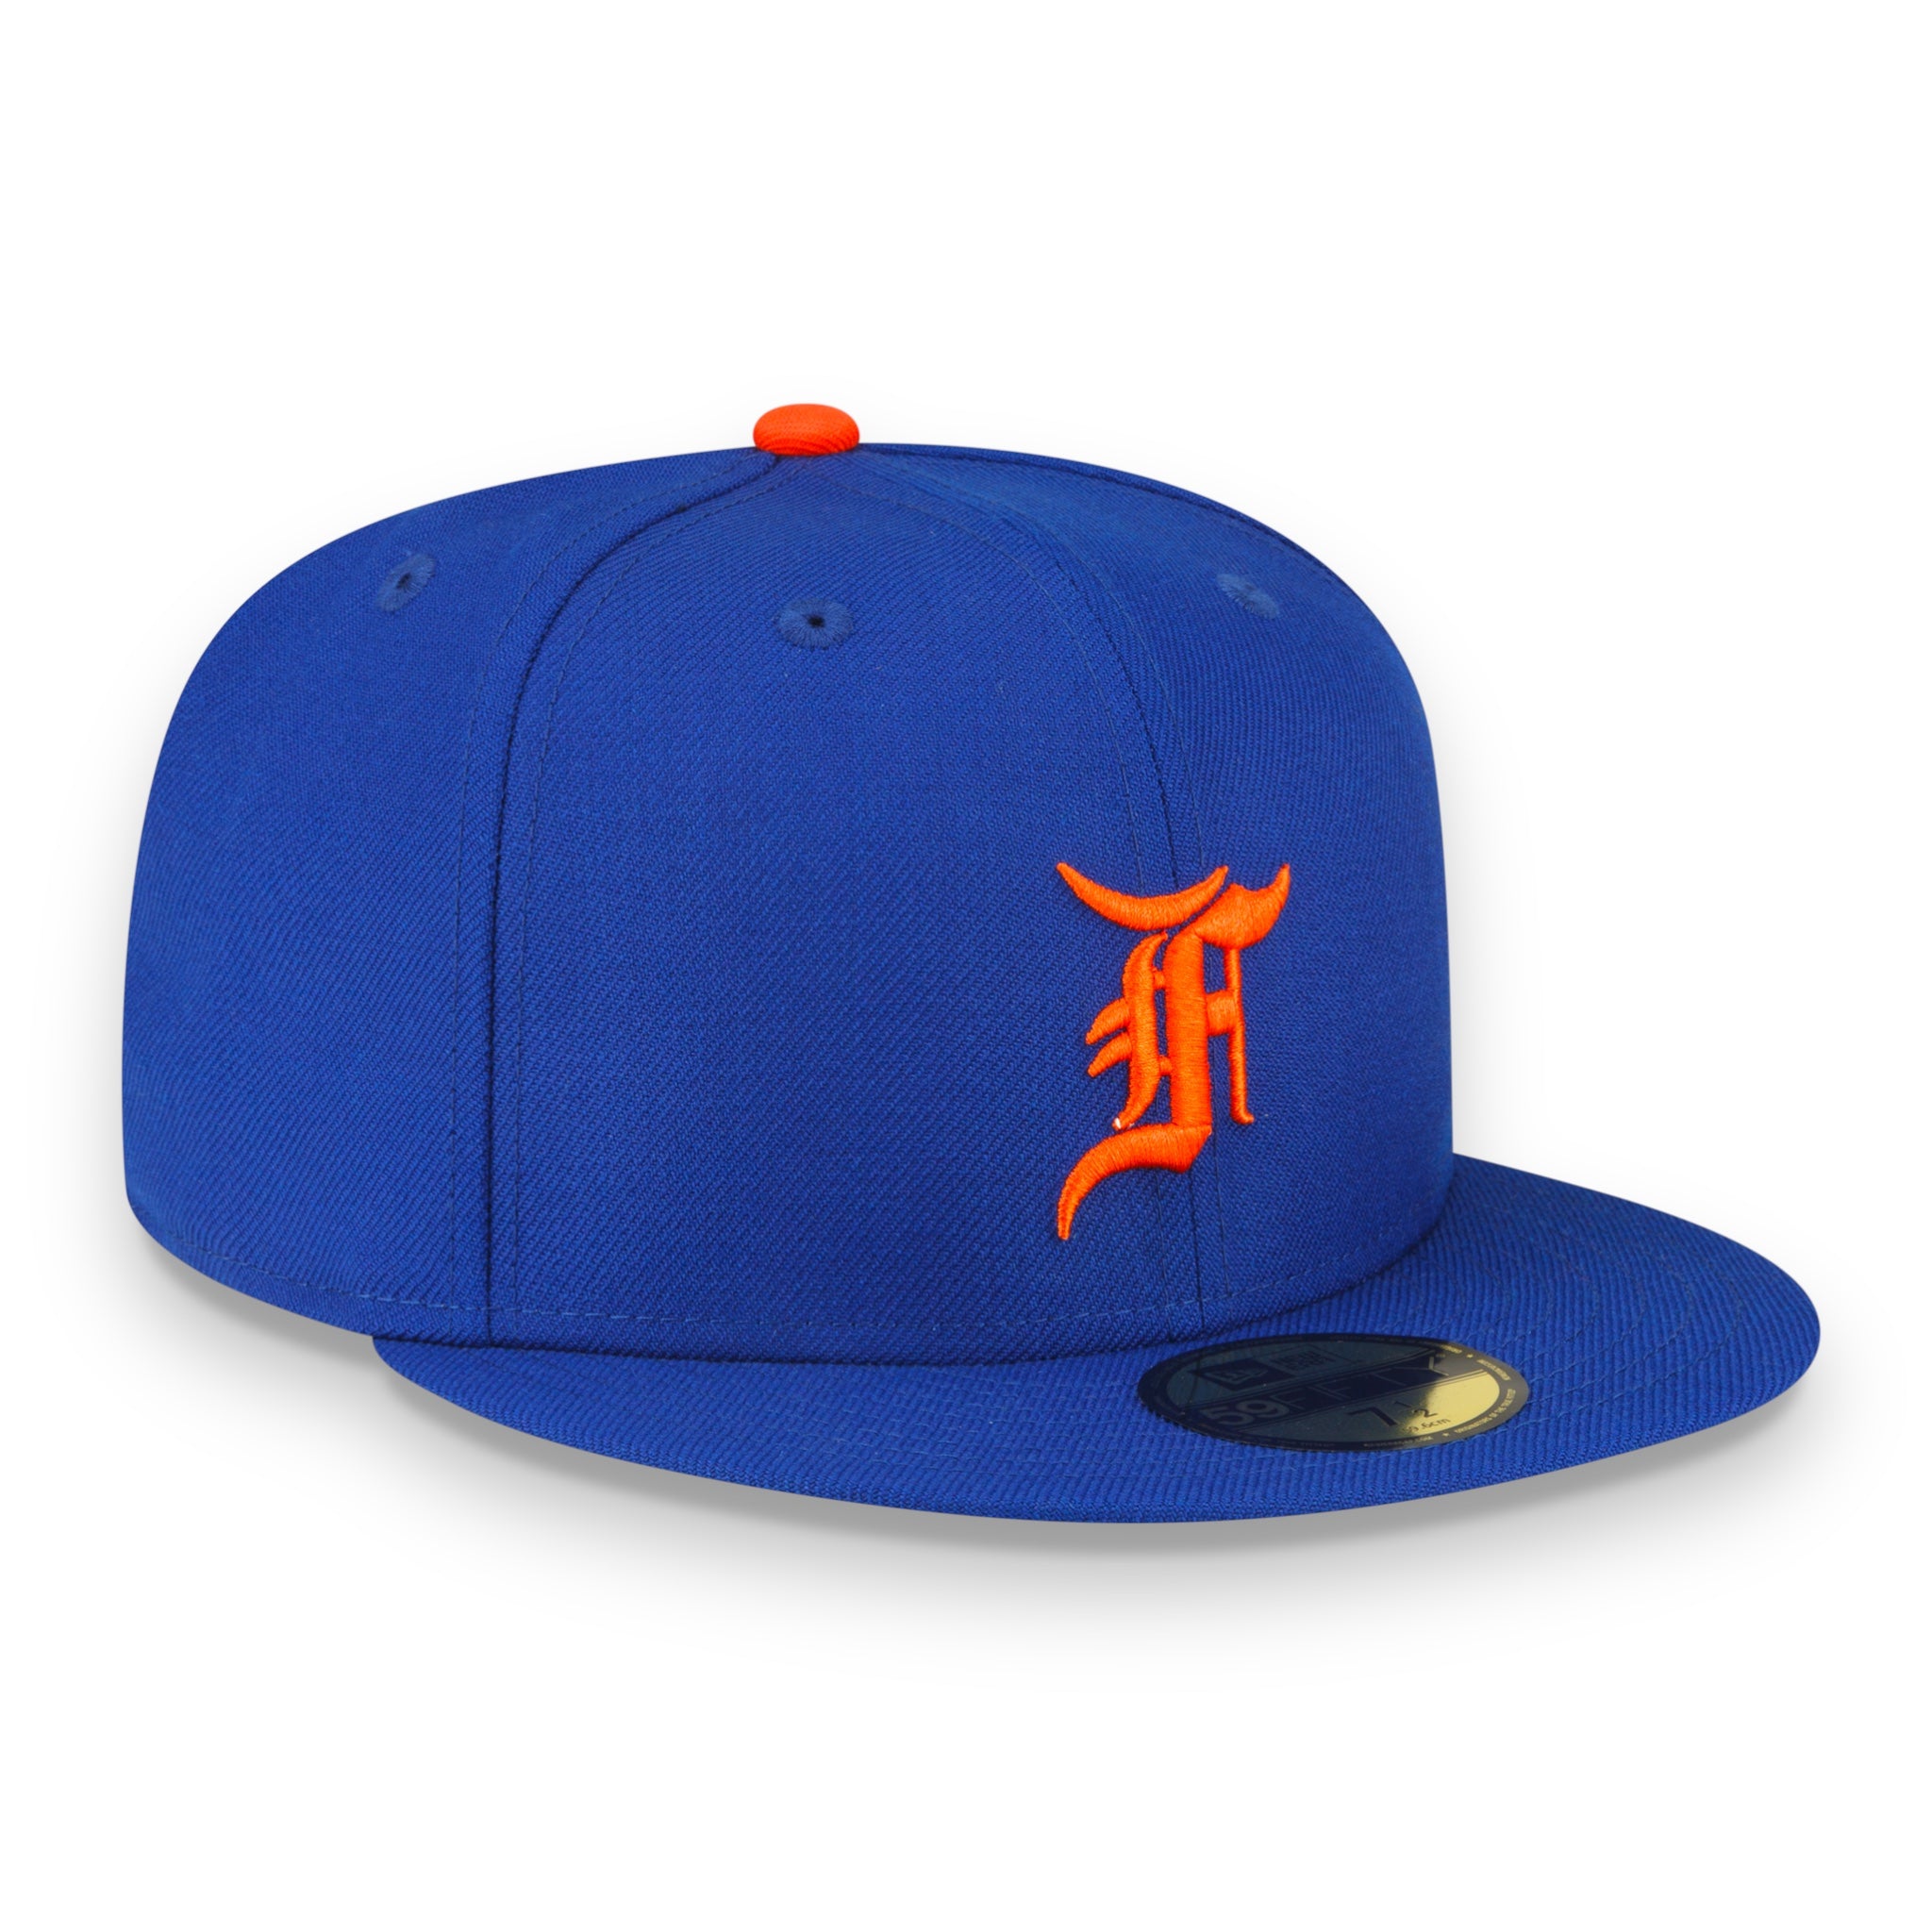 NEW YORK METS (FEAR OF GOD) NEW ERA 59FIFTY FITTED